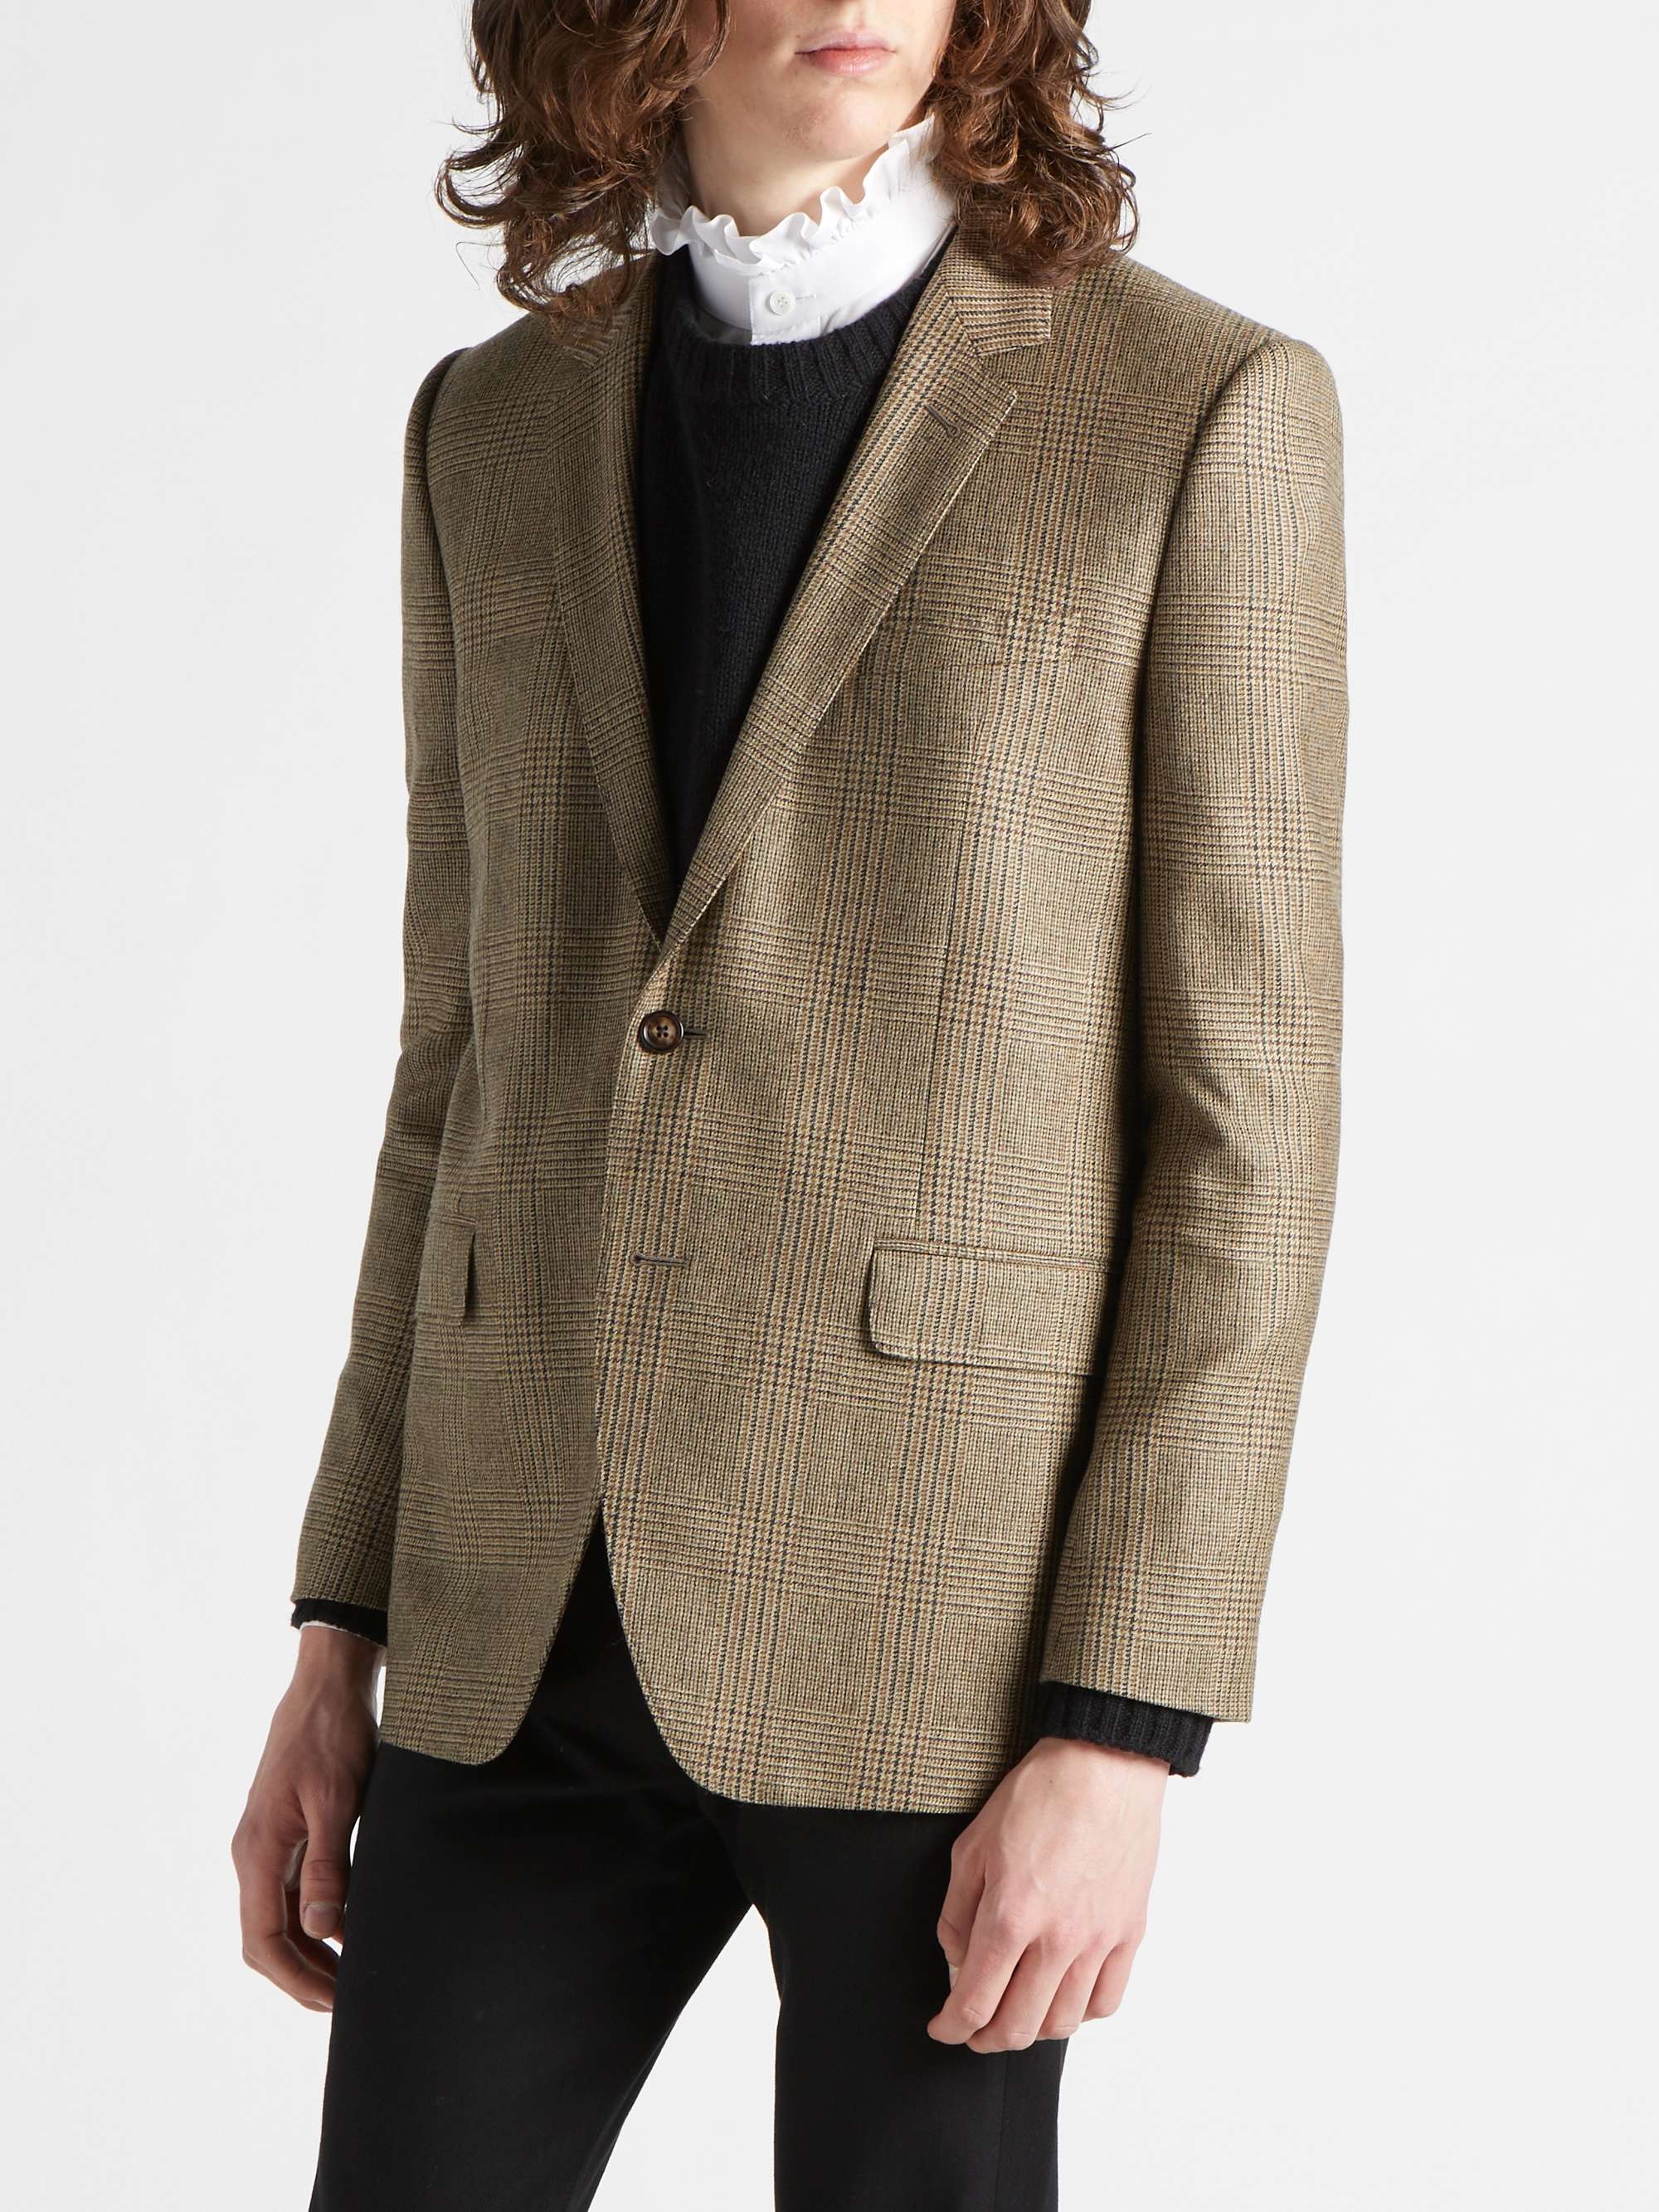 CELINE HOMME Prince of Wales Checked Wool Blazer